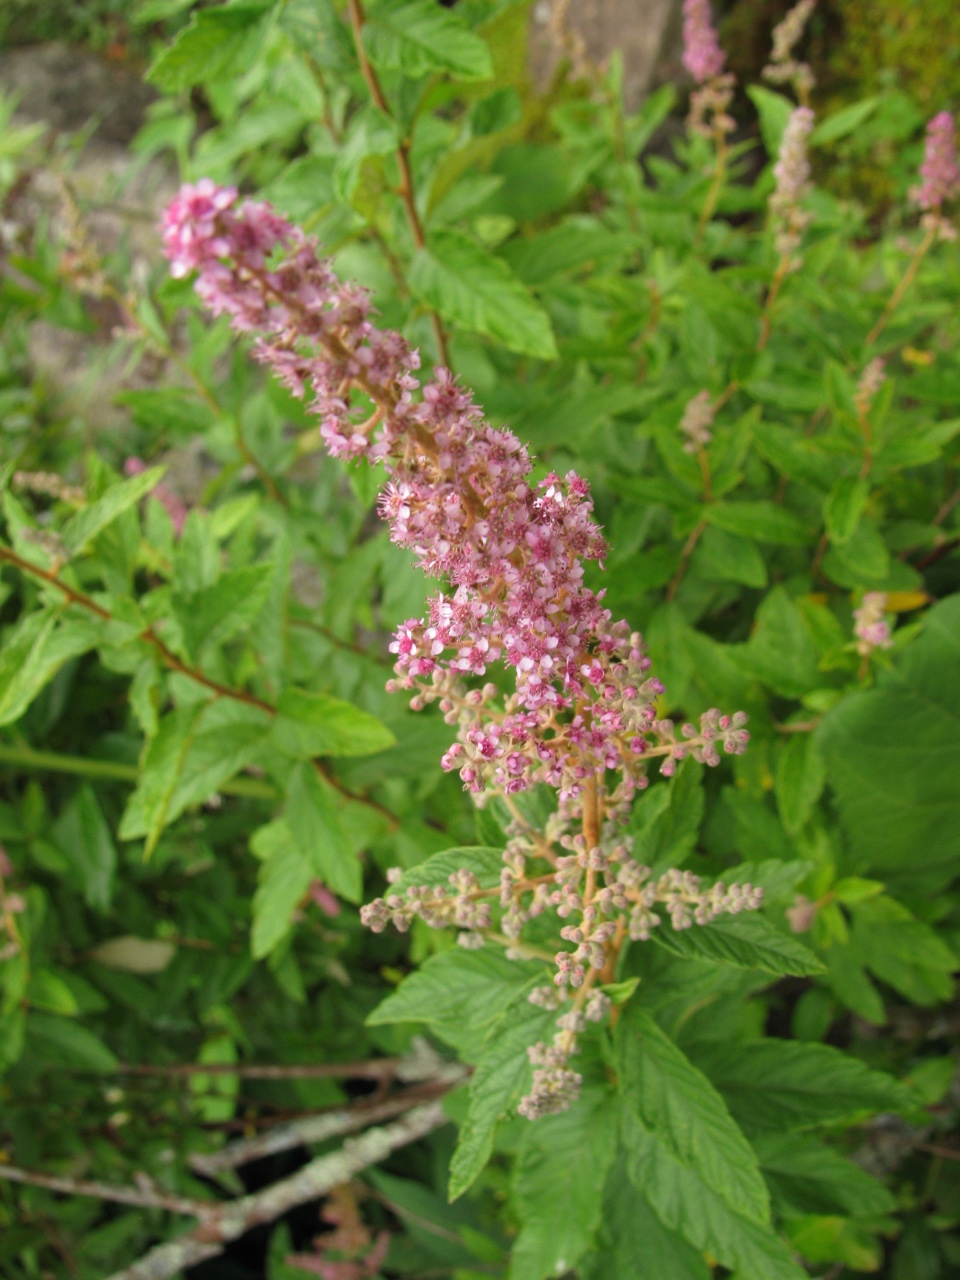 The Scientific Name is Spiraea tomentosa. You will likely hear them called Hardhack, Steeplebush, Rosy Meadowsweet. This picture shows the The inflorescence has a narrow 